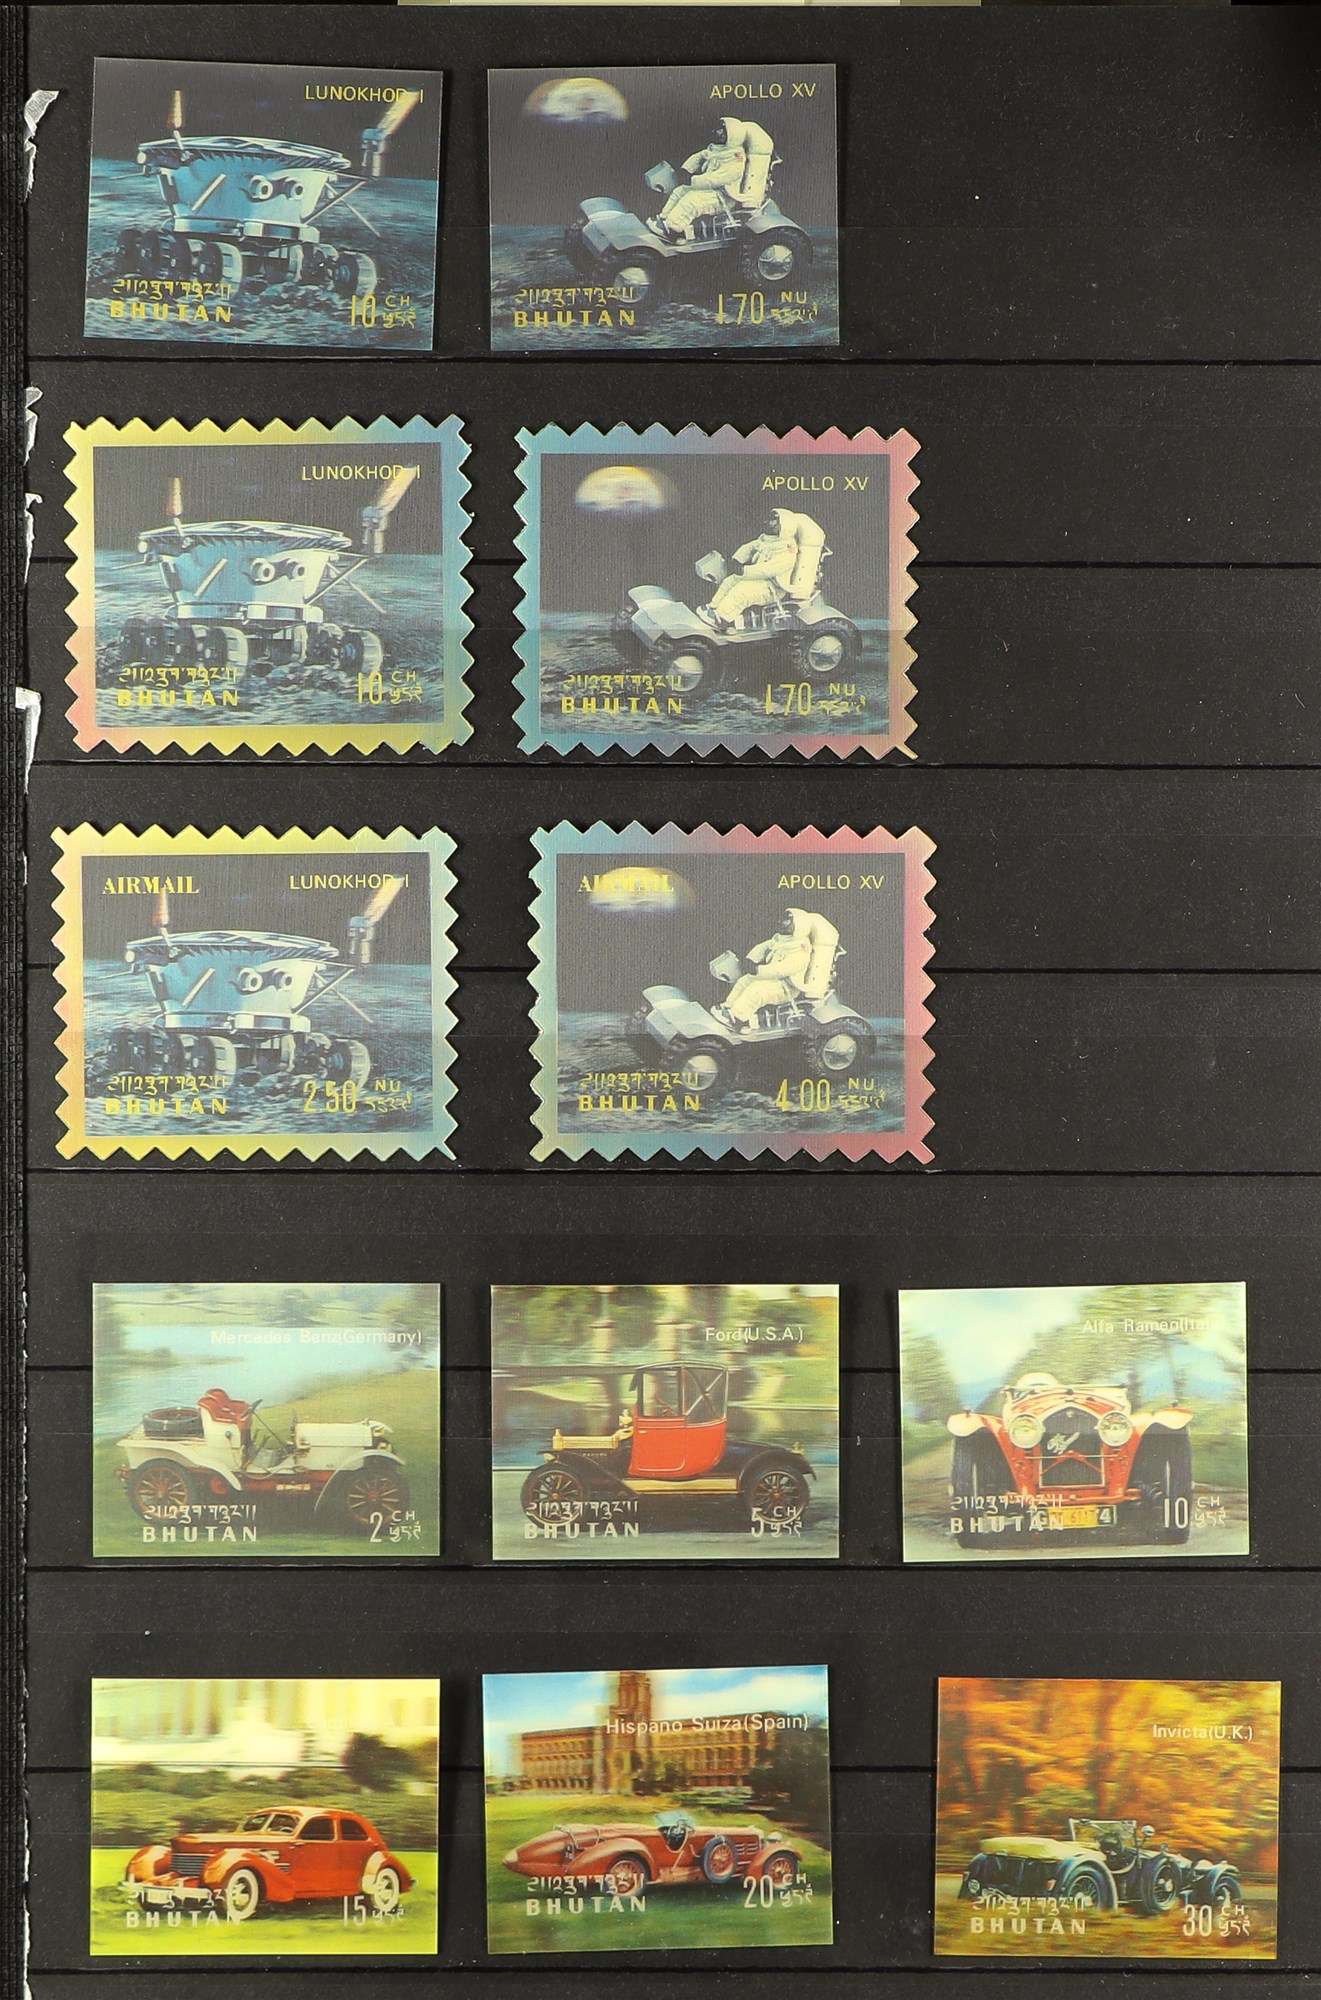 BHUTAN 1962 - 2001 COLLECTION of never hinged mint chiefly complete sets incl gold foil, embossed, - Image 4 of 10